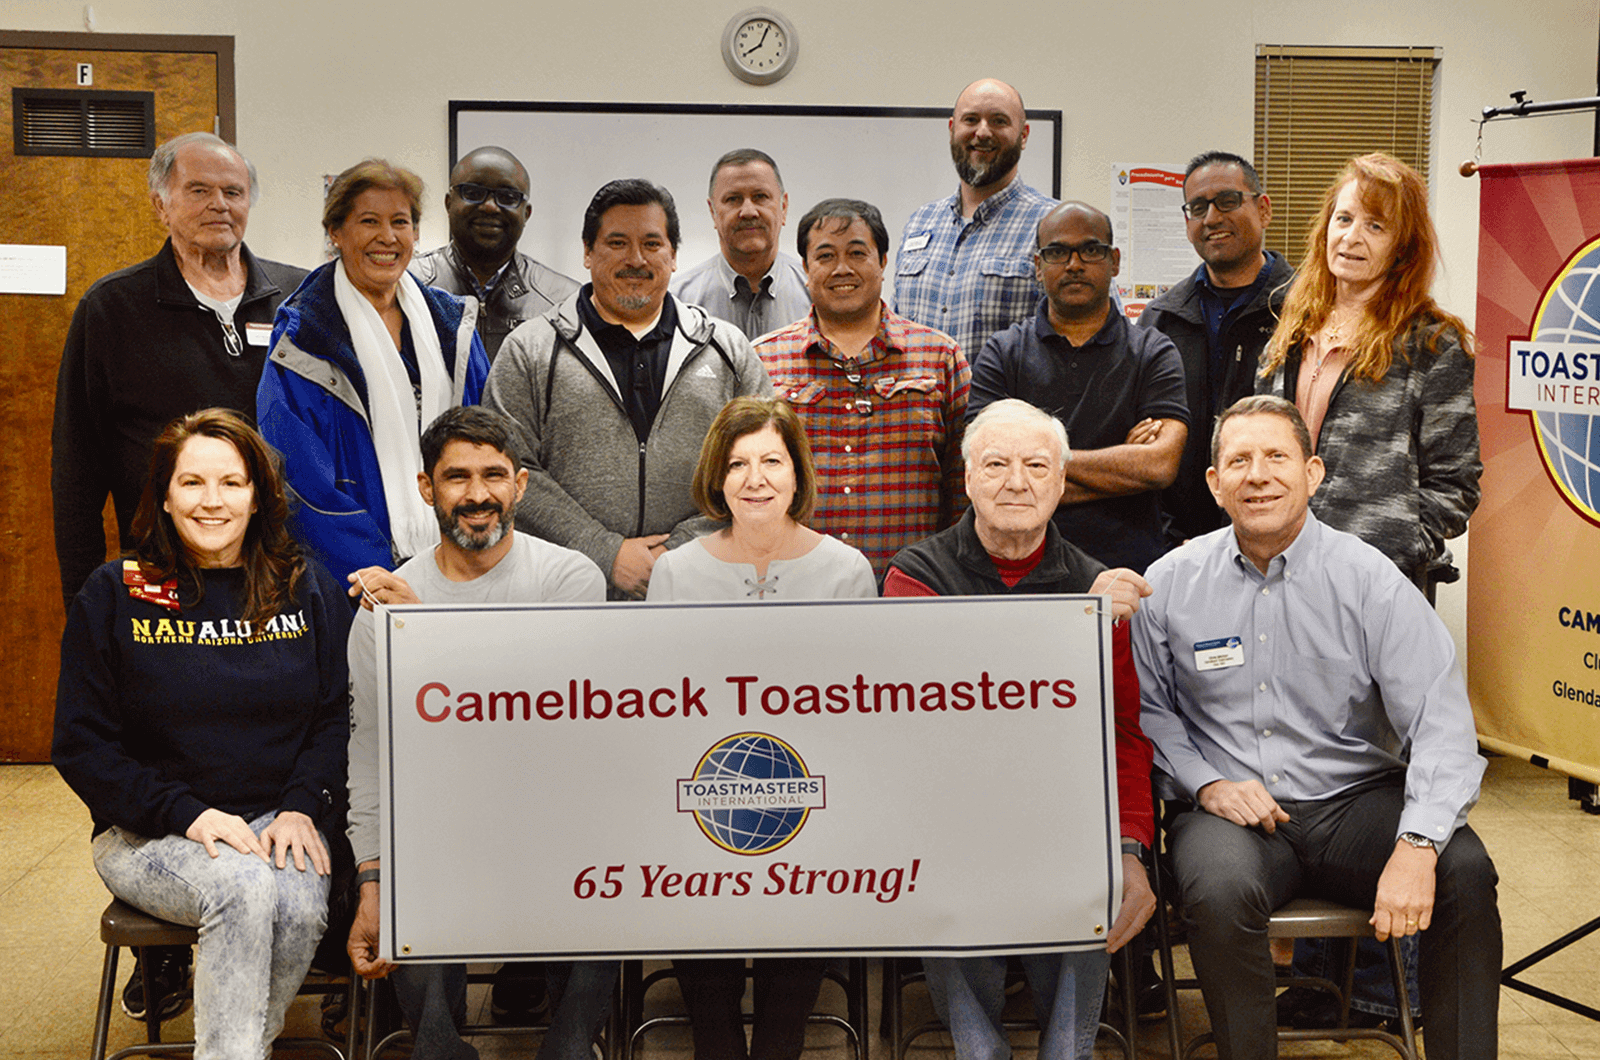 Members of Toastmasters club hold up sign with club name